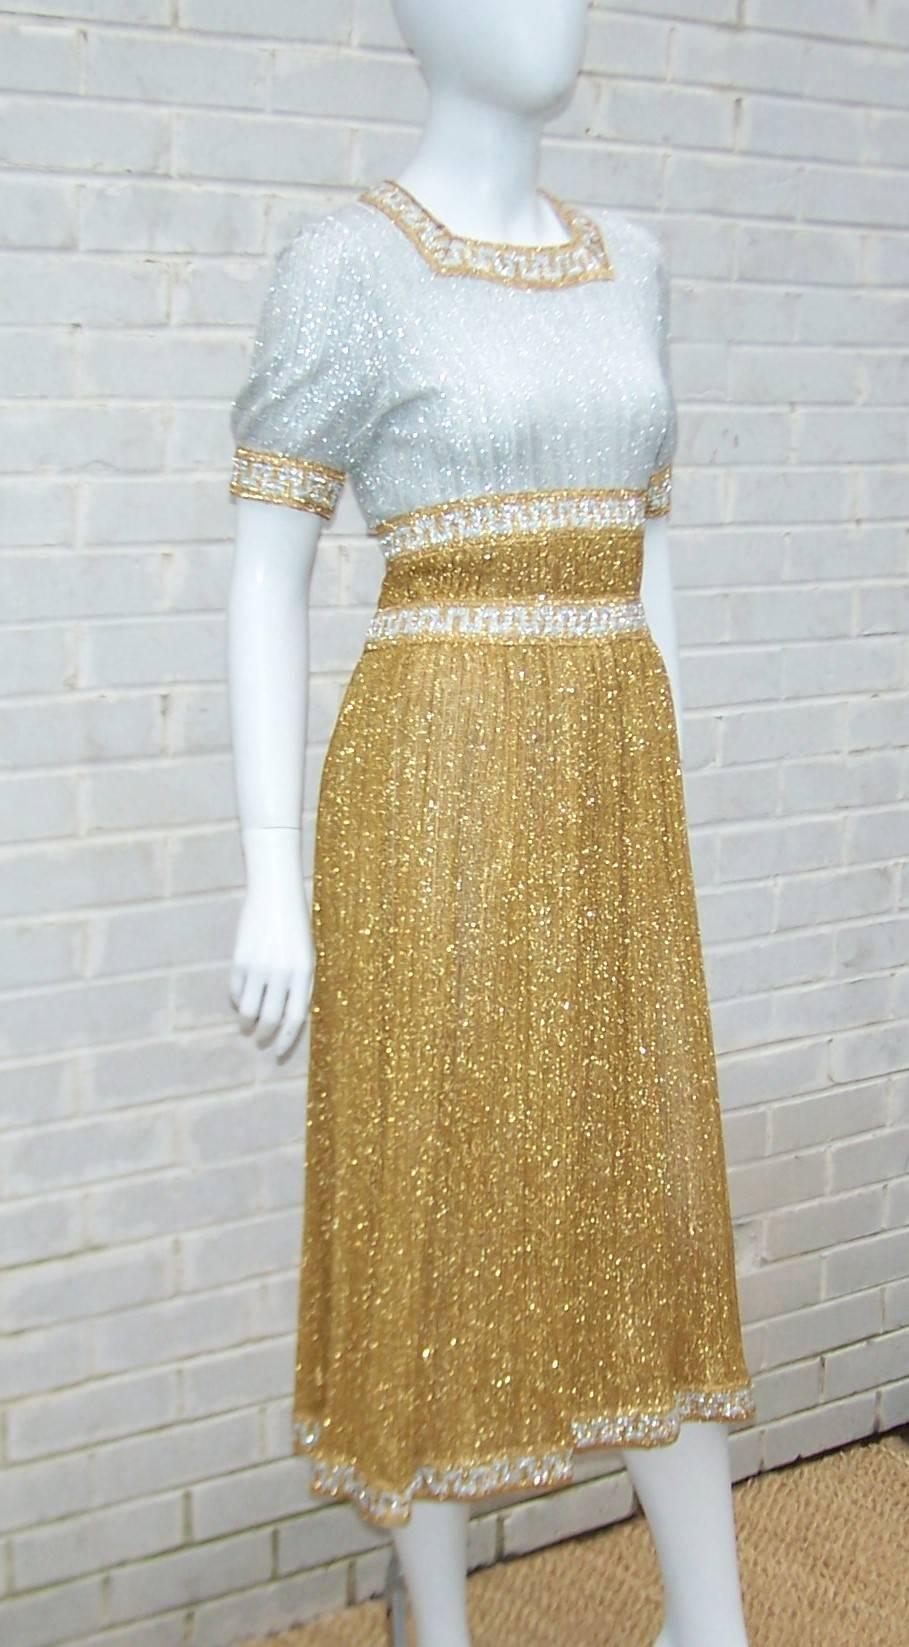 Stan Herman produced cutting edge fashion for Mr. Mort in the 1960's and this gold & silver lamé dress is a dazzling example of his work.  The dress zips and hooks at the back with a knit style fabric expertly ribbed and banded with a Greek key